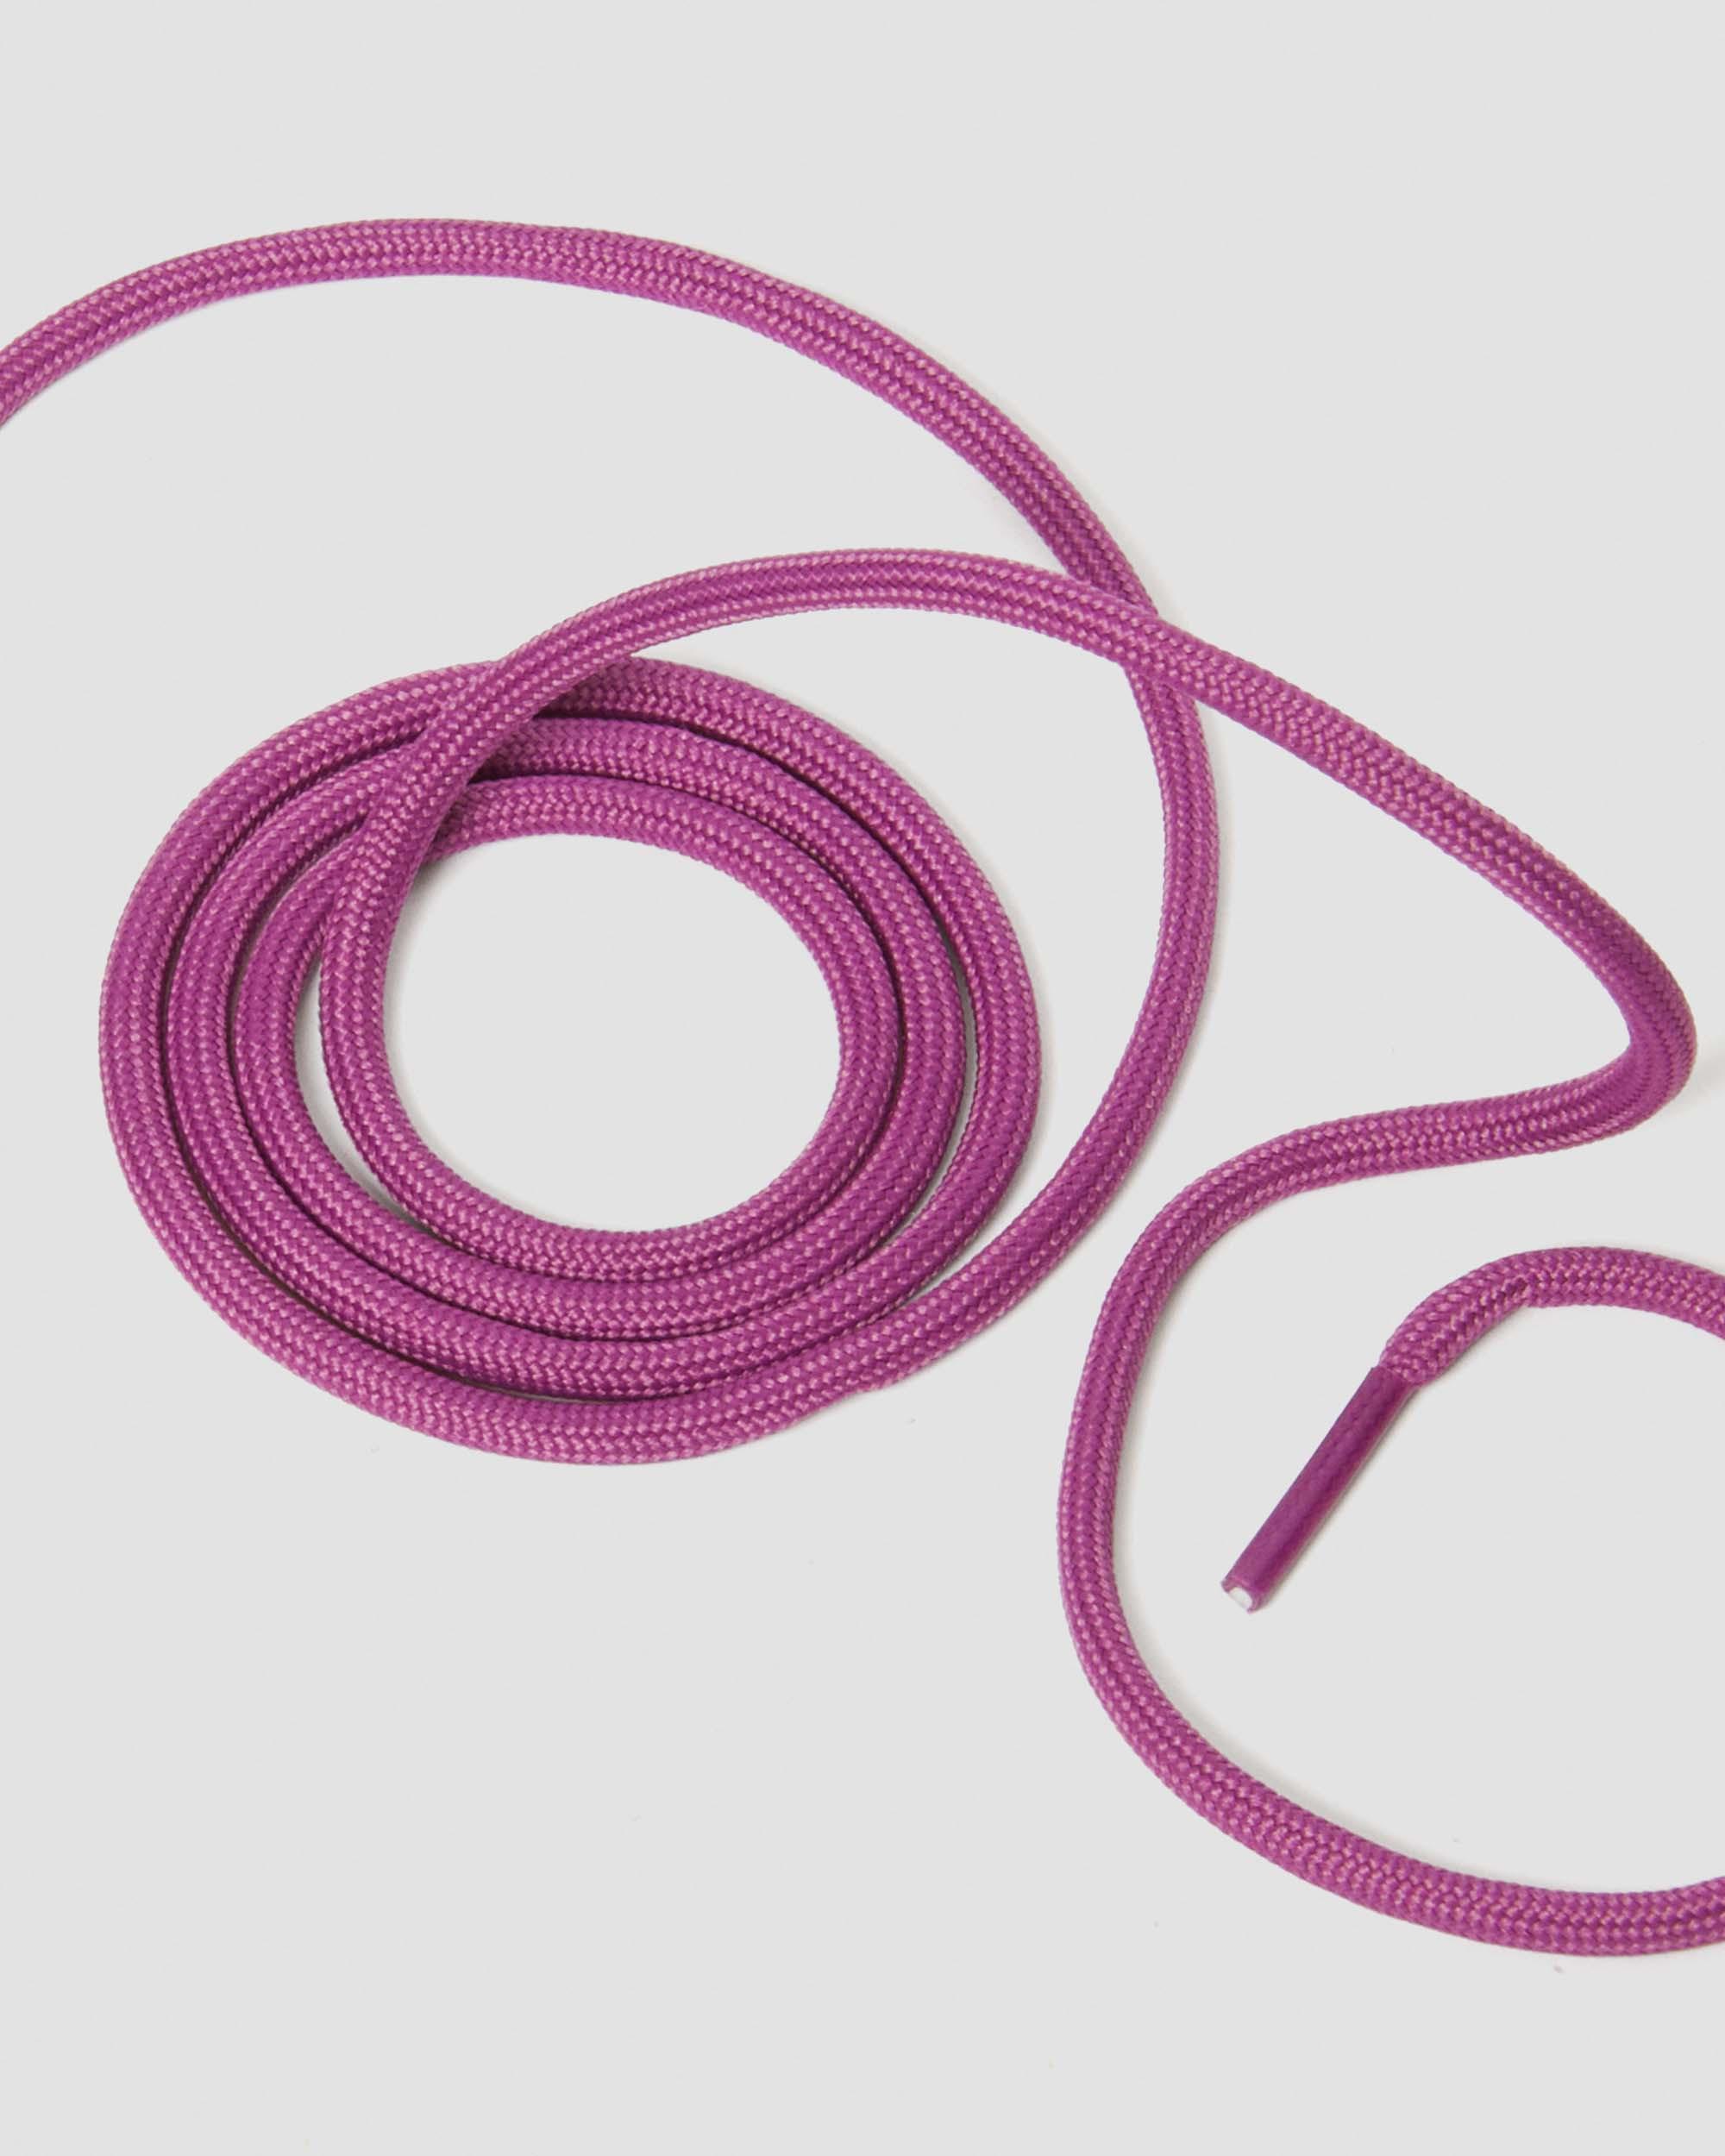 55 Inch Round Shoe Laces (8-10 Eye) in Muted Purple